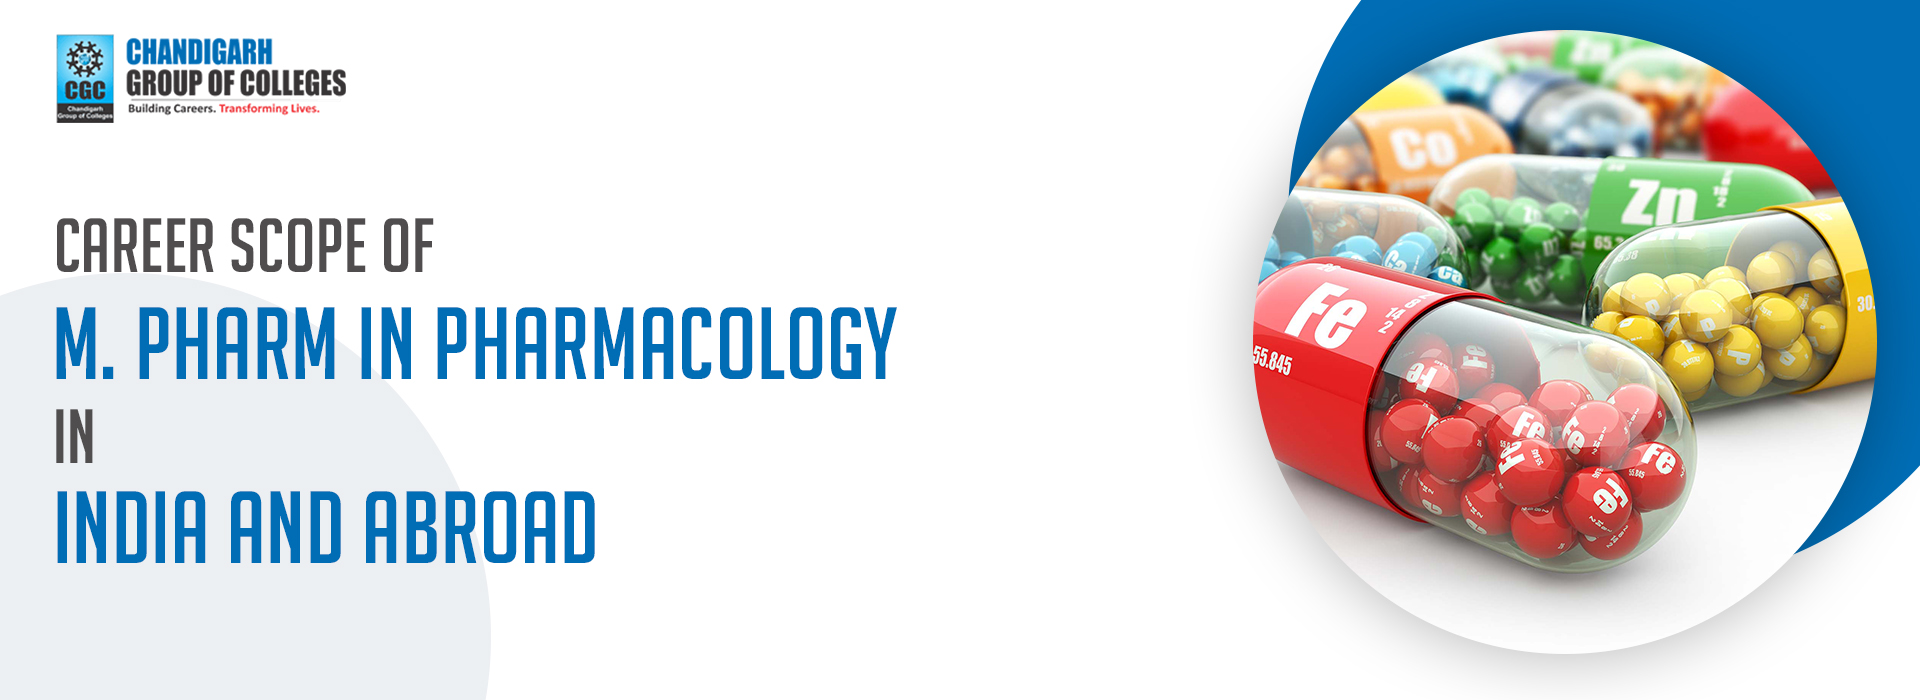 Career Scope of M. Pharm in Pharmacology in India and abroad 